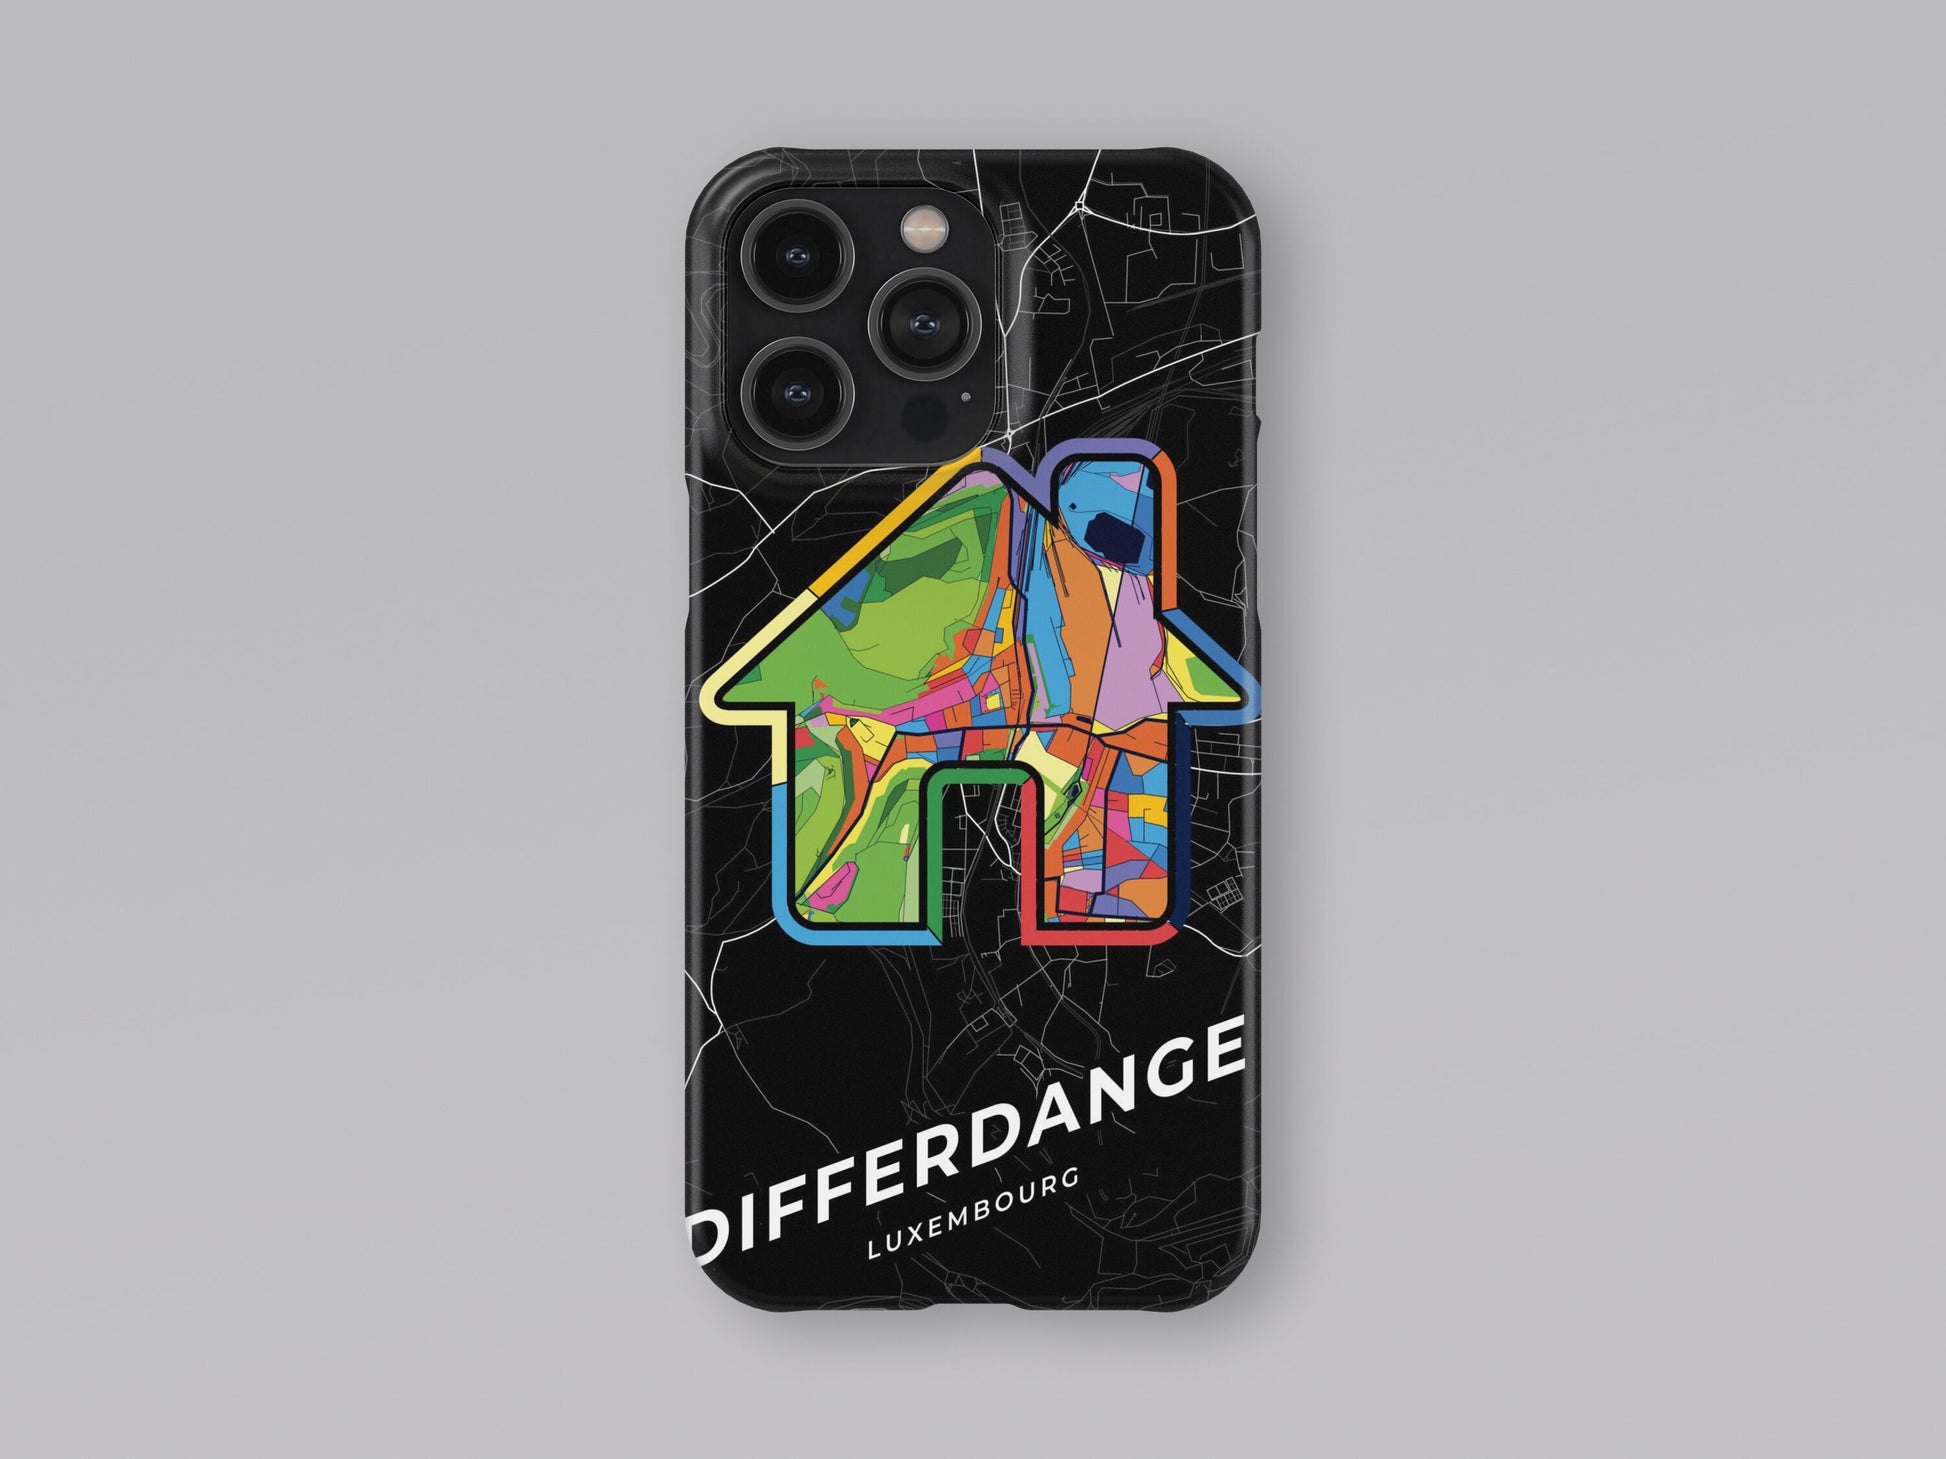 Differdange Luxembourg slim phone case with colorful icon. Birthday, wedding or housewarming gift. Couple match cases. 3